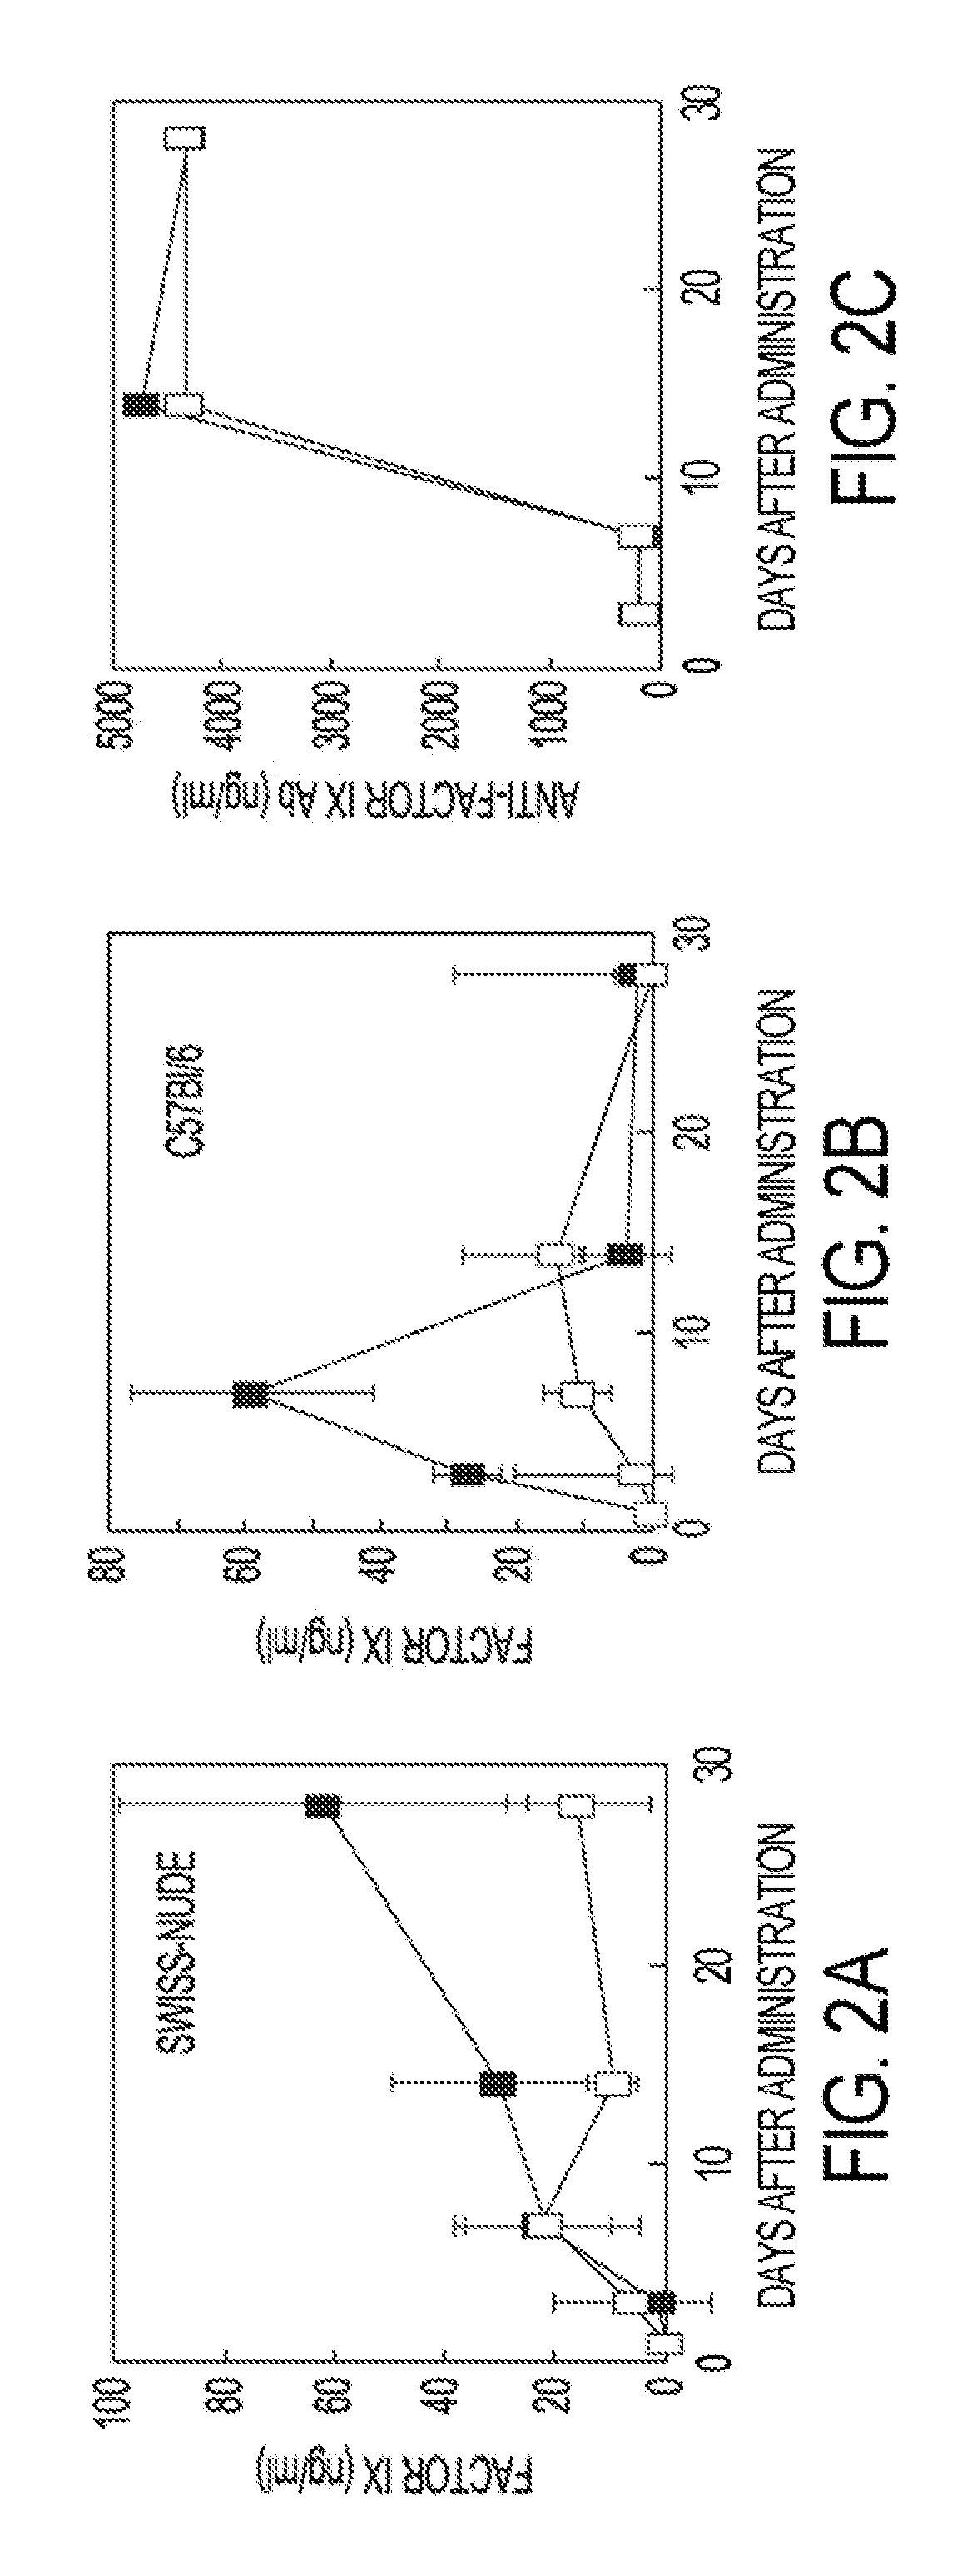 Lentiviral vectors featuring liver specific transcriptional enhancer and methods of using same